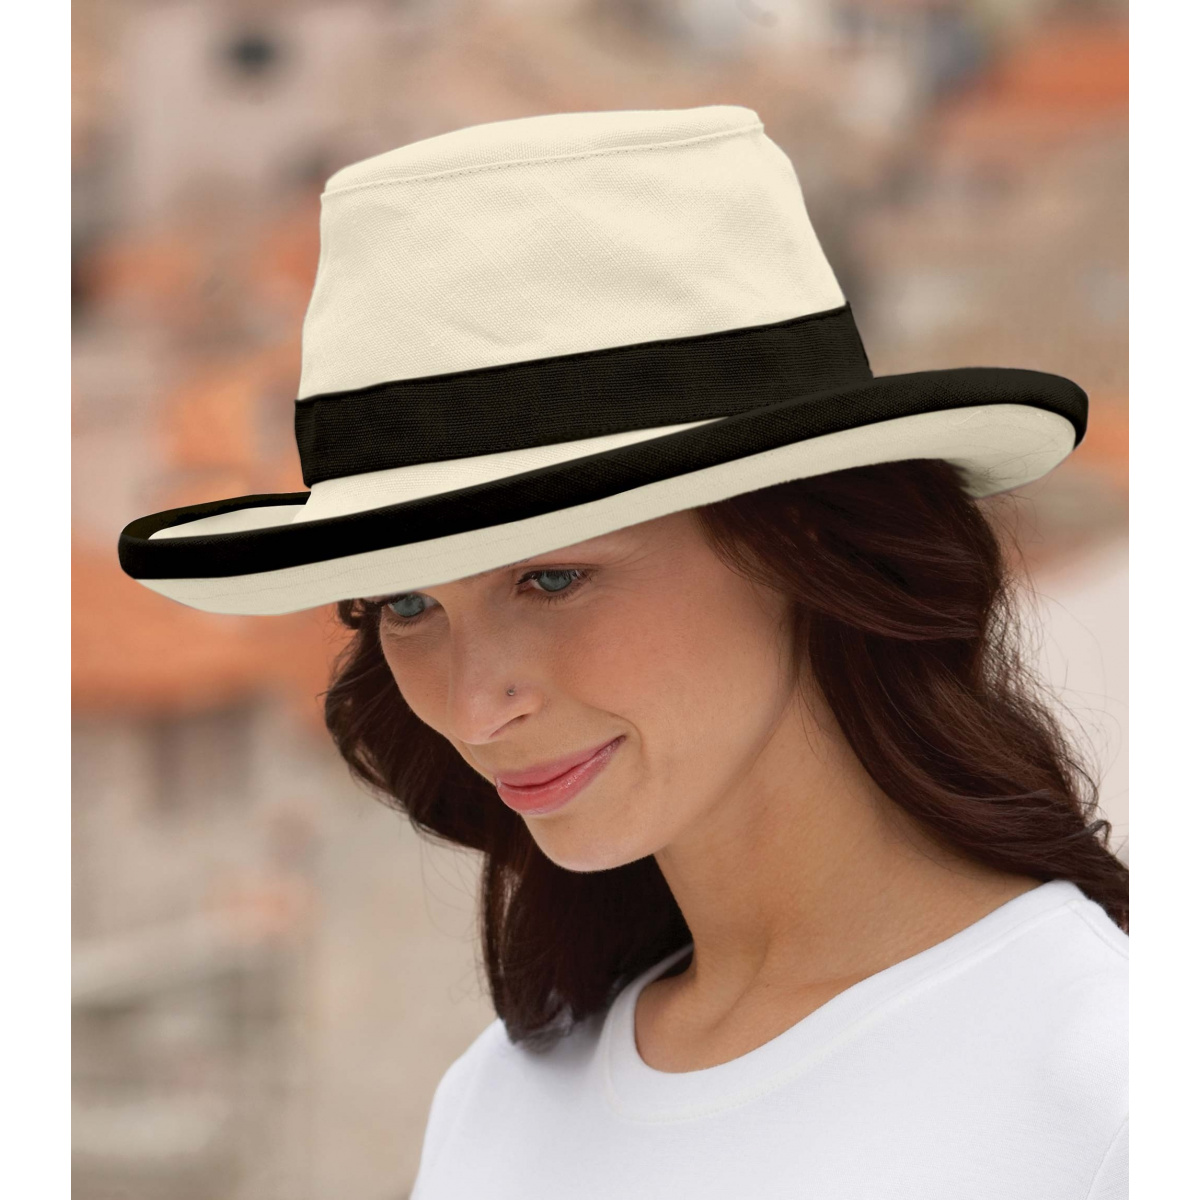 Chapeau Tilley femme TH8 Reference : 3634